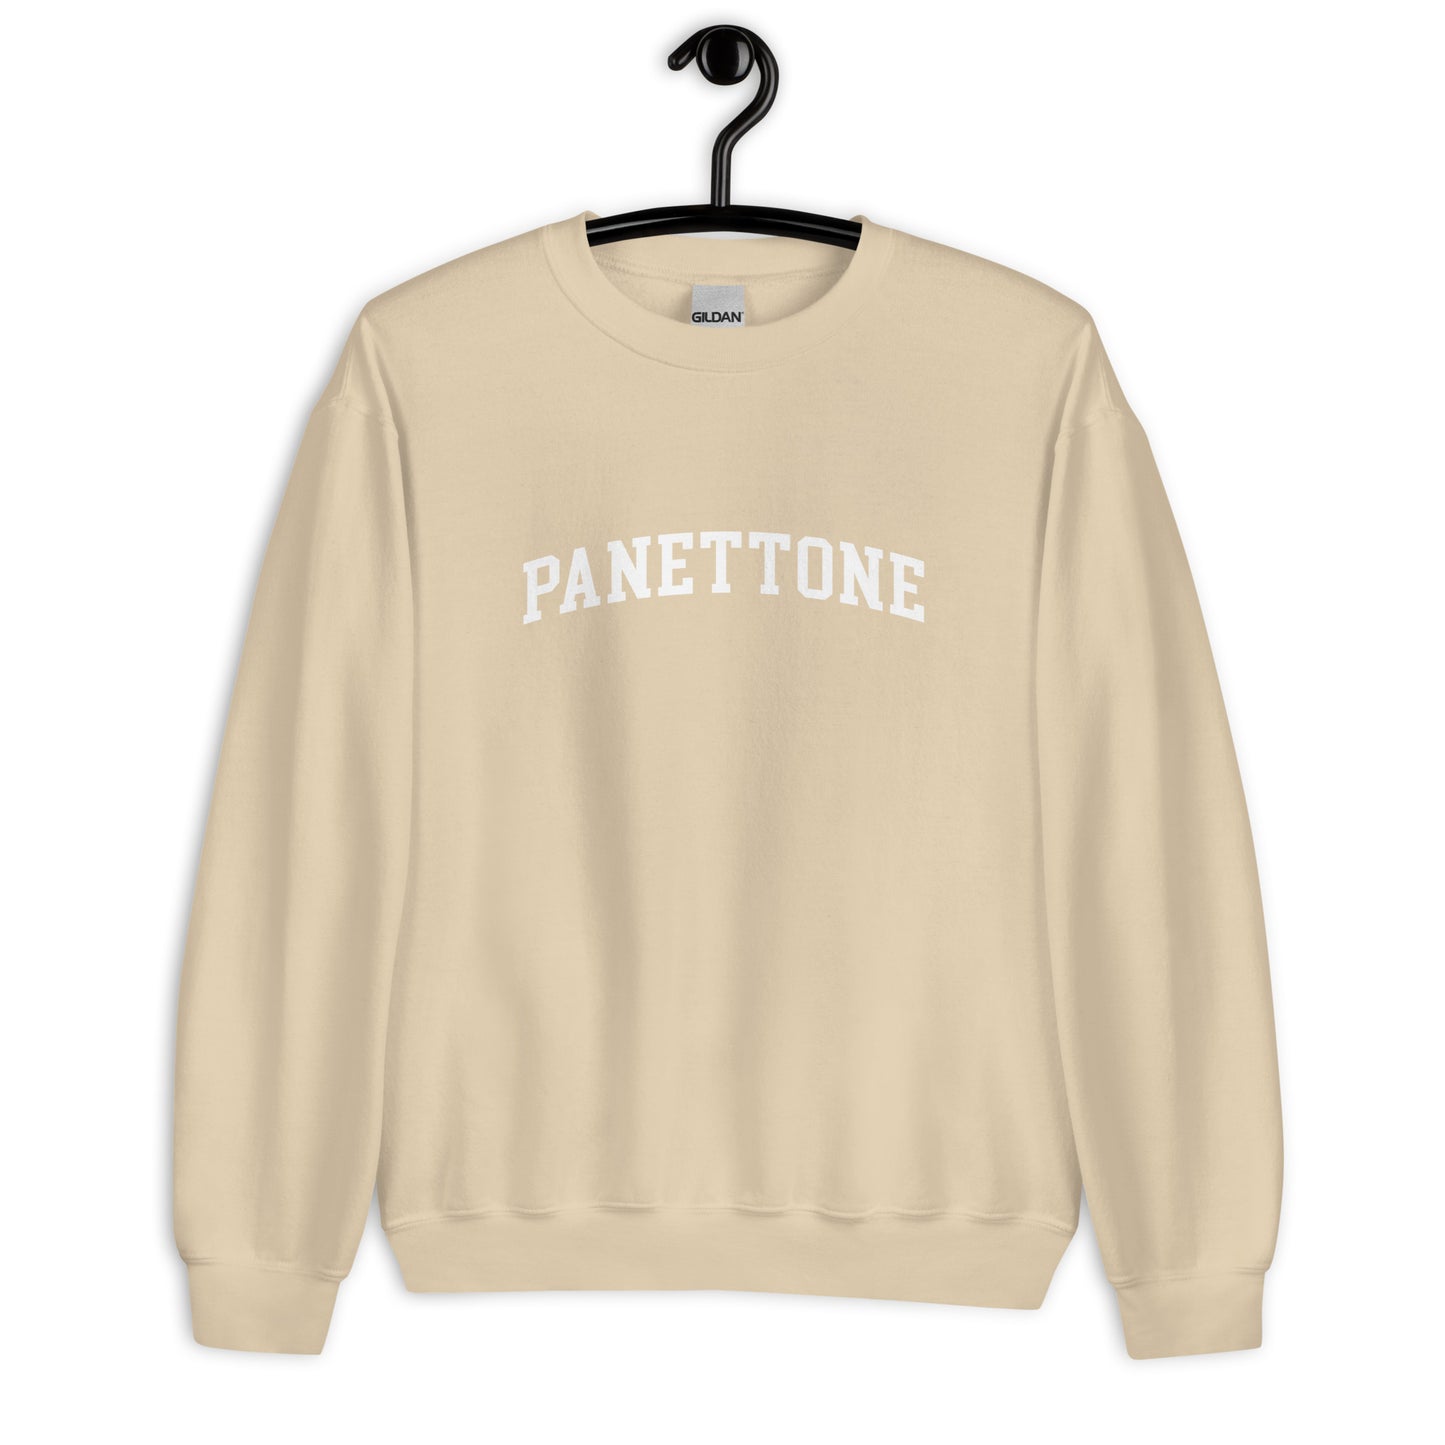 Panettone Sweatshirt - Arched Font